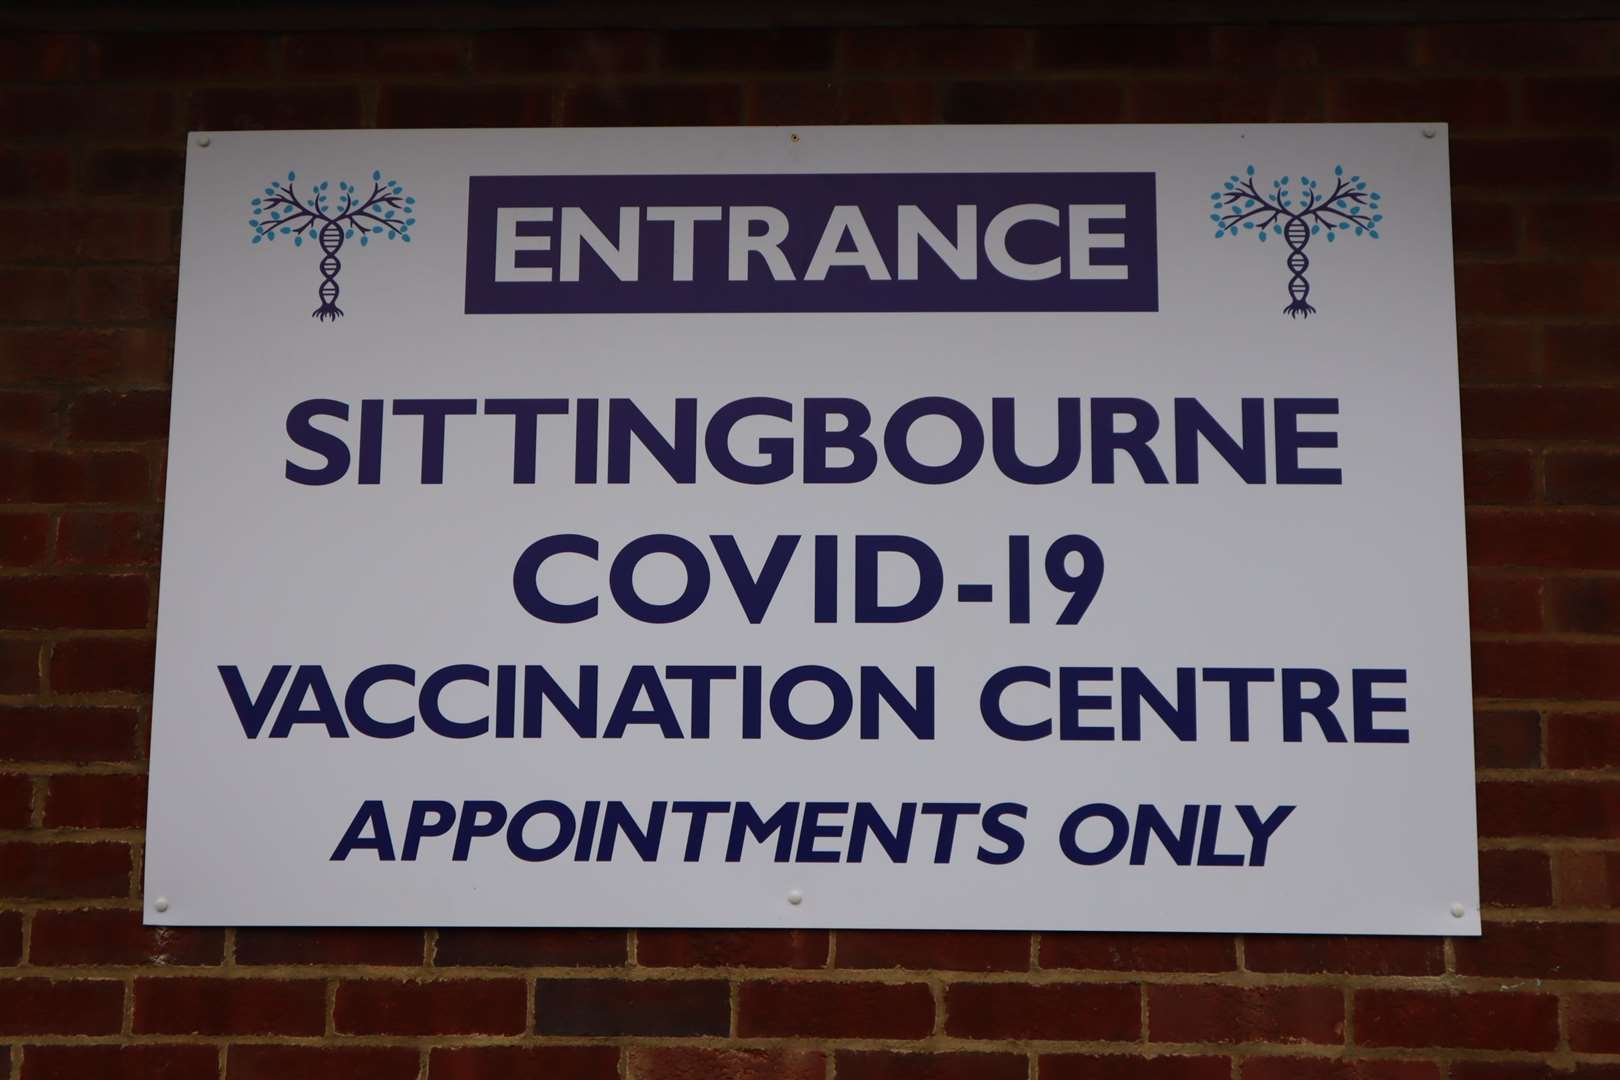 Age UK's Heather House day centre in the Avenue of Remembrance, Sittingbourne, is being used as a coronavirus vaccination centre.